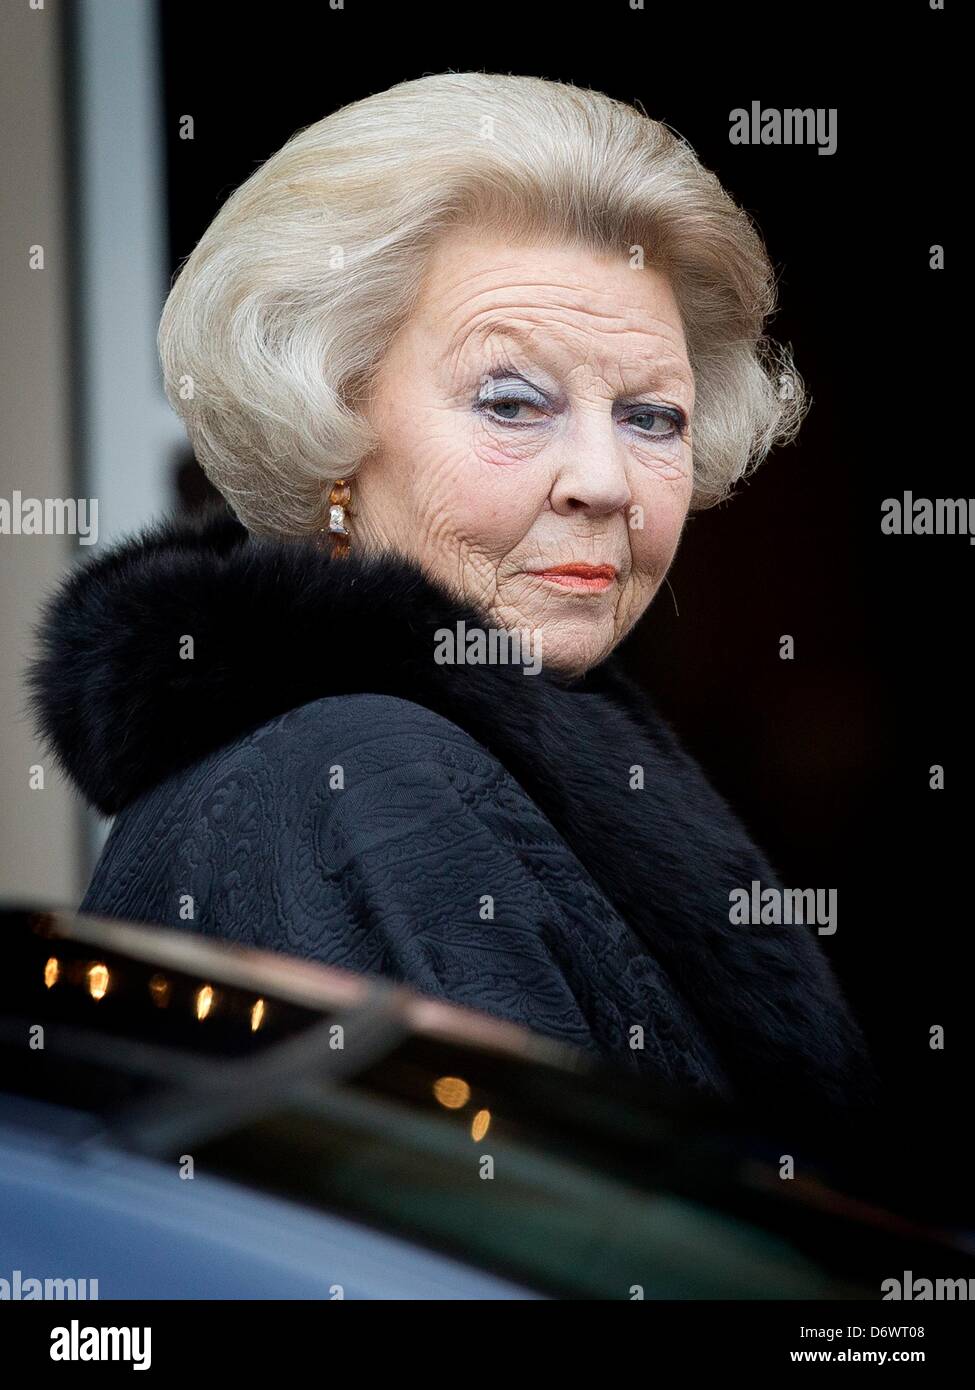 The Hague, The Netherlands. 23rd April, 2013. Queen Beatrix of The Netherlands attends the Koninginnedag concert (Queen's Day concert) at Royal Palace Noordeinde in The Hague, The Netherlands, 23 April 2013. Photo: Patrick van Katwijk/dpa/Alamy Live News Stock Photo